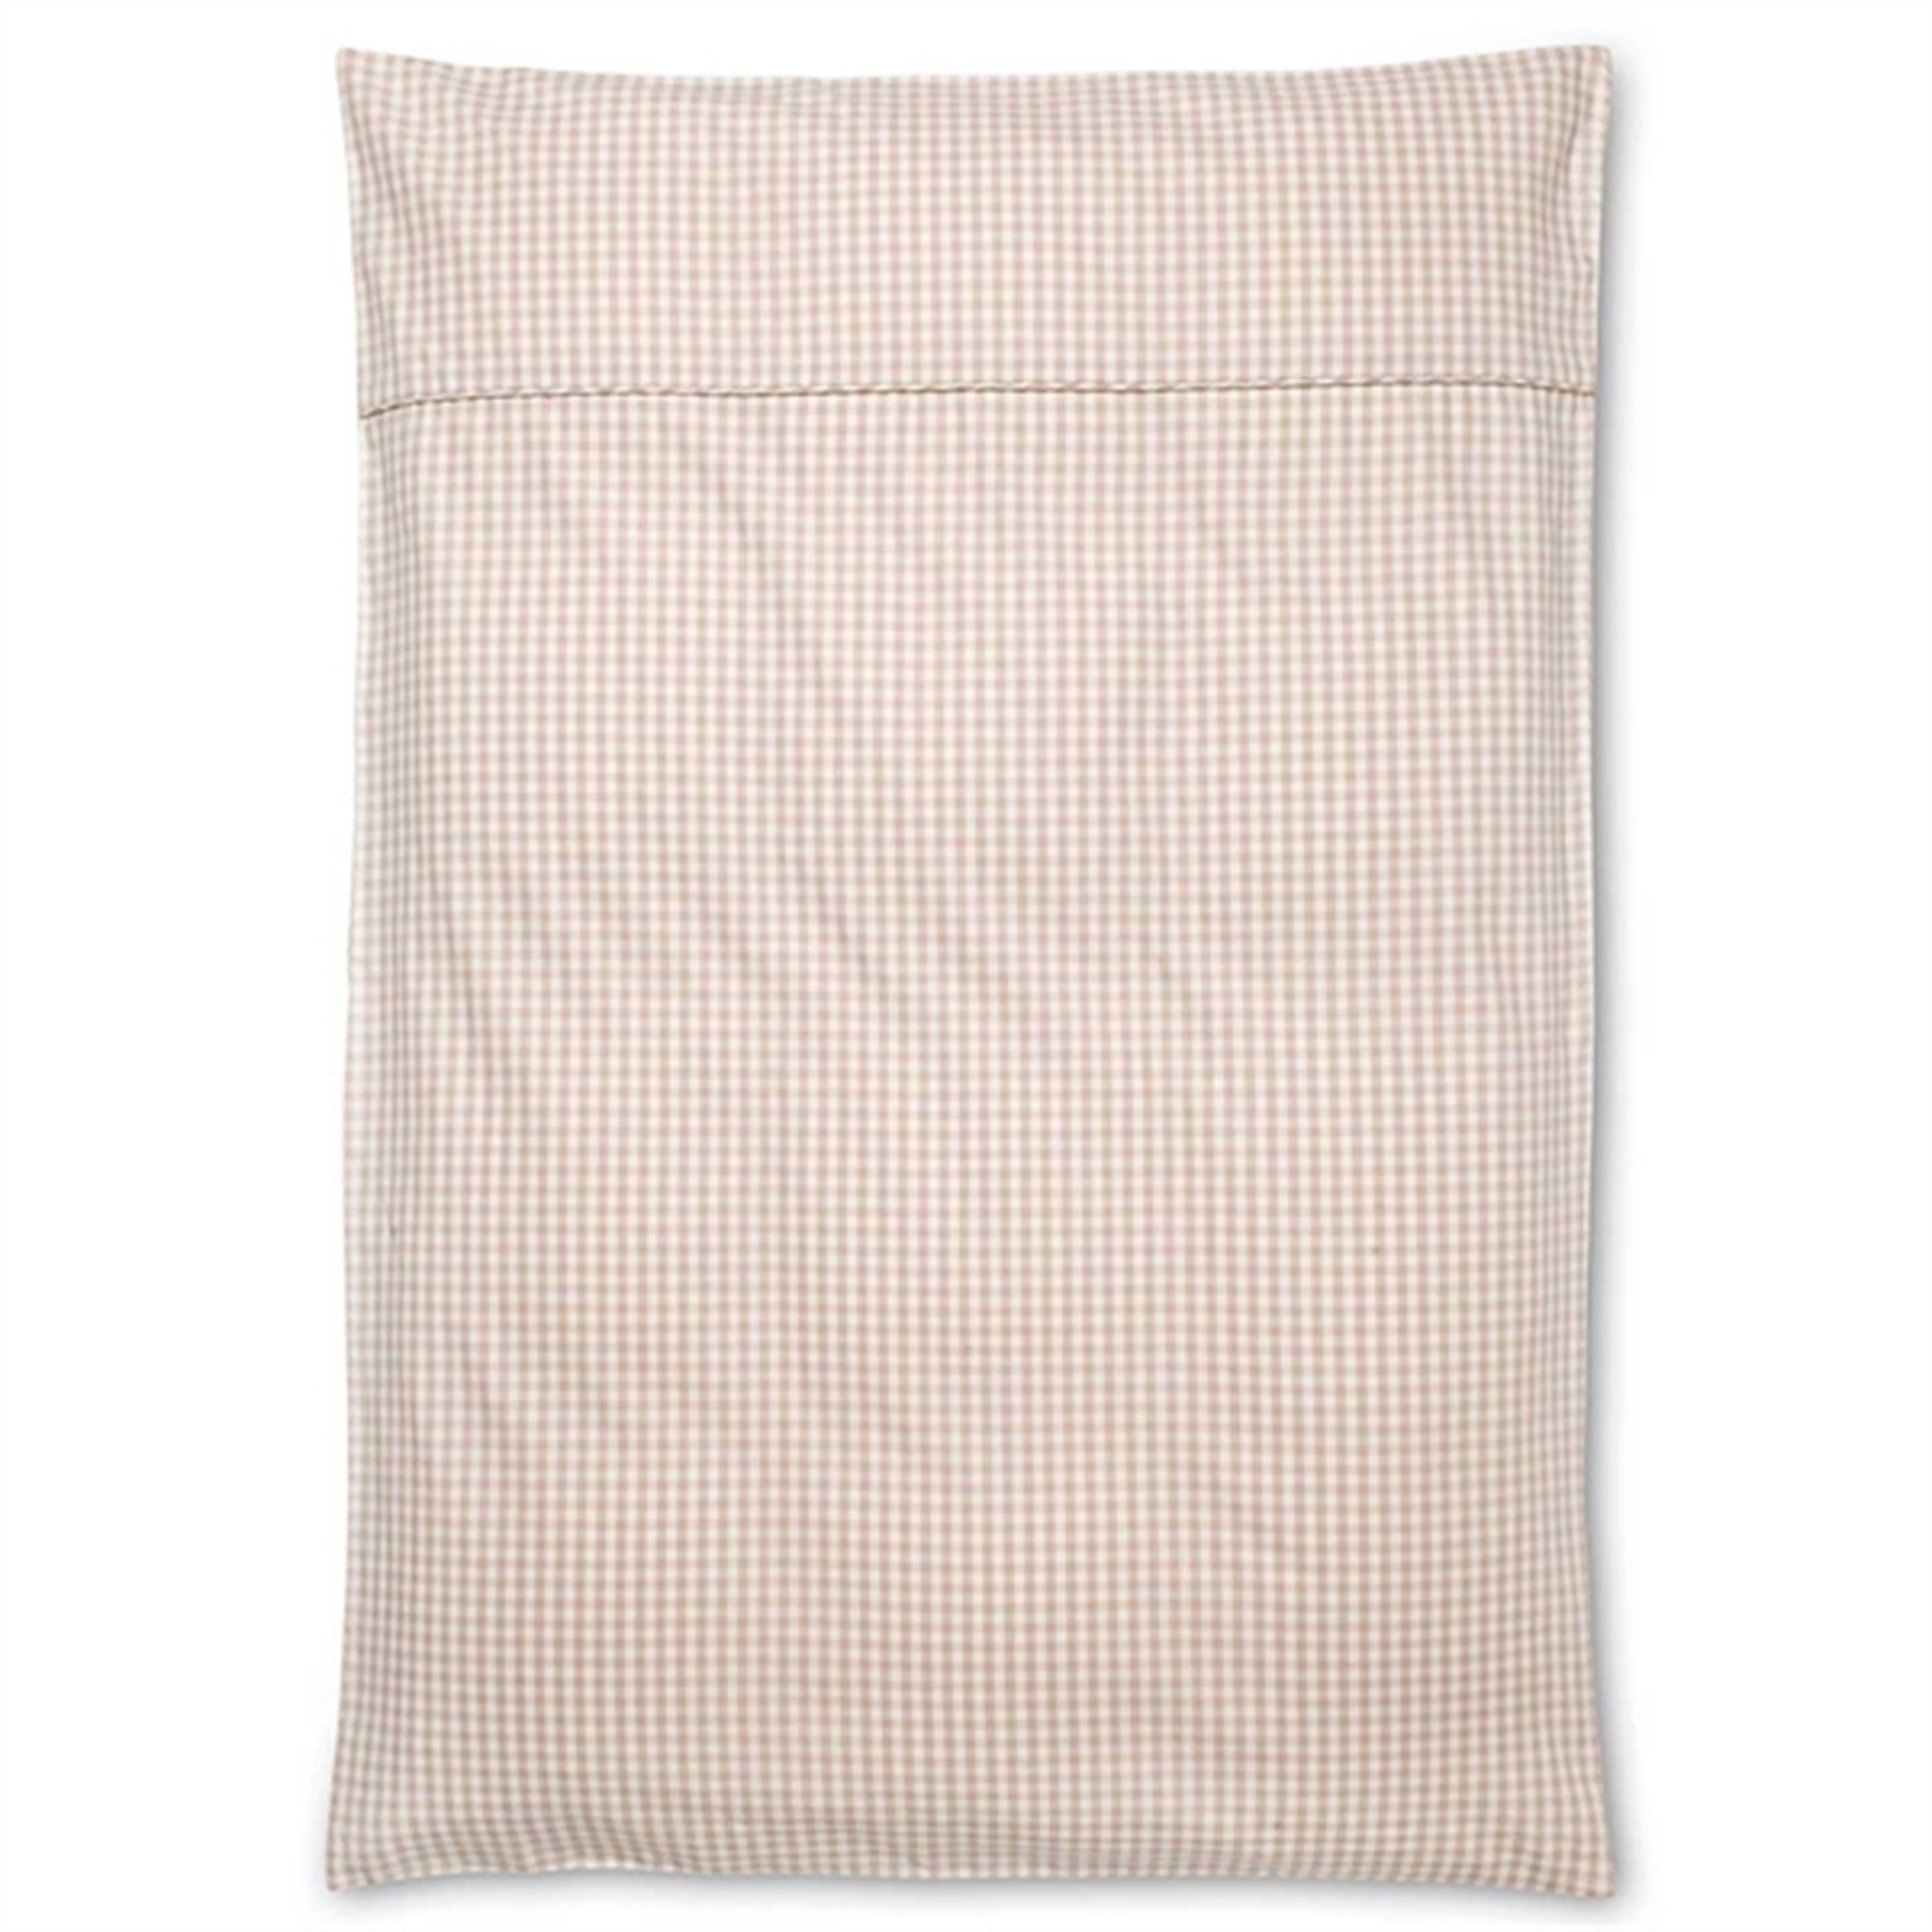 lalaby Beige Gingham Classic Bedding